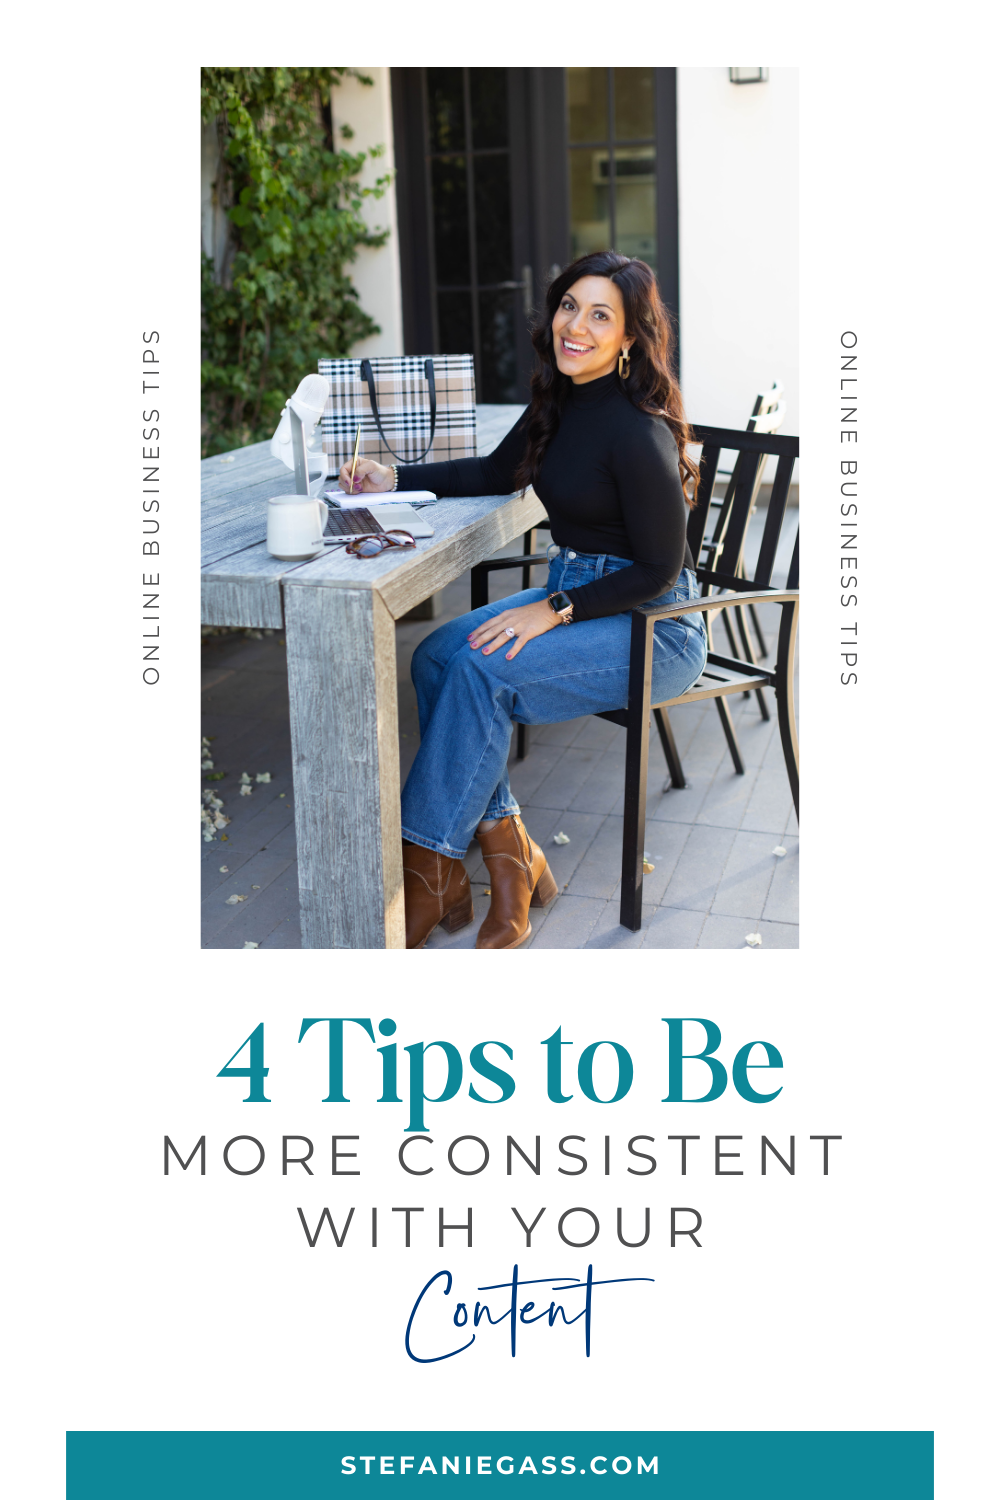 4 Tips to Be More Consistent with your Content. Brown haired woman sitting at table outside with laptop, drink, sunglasses, purse and she's wearing a black shirt with jeans and boots.